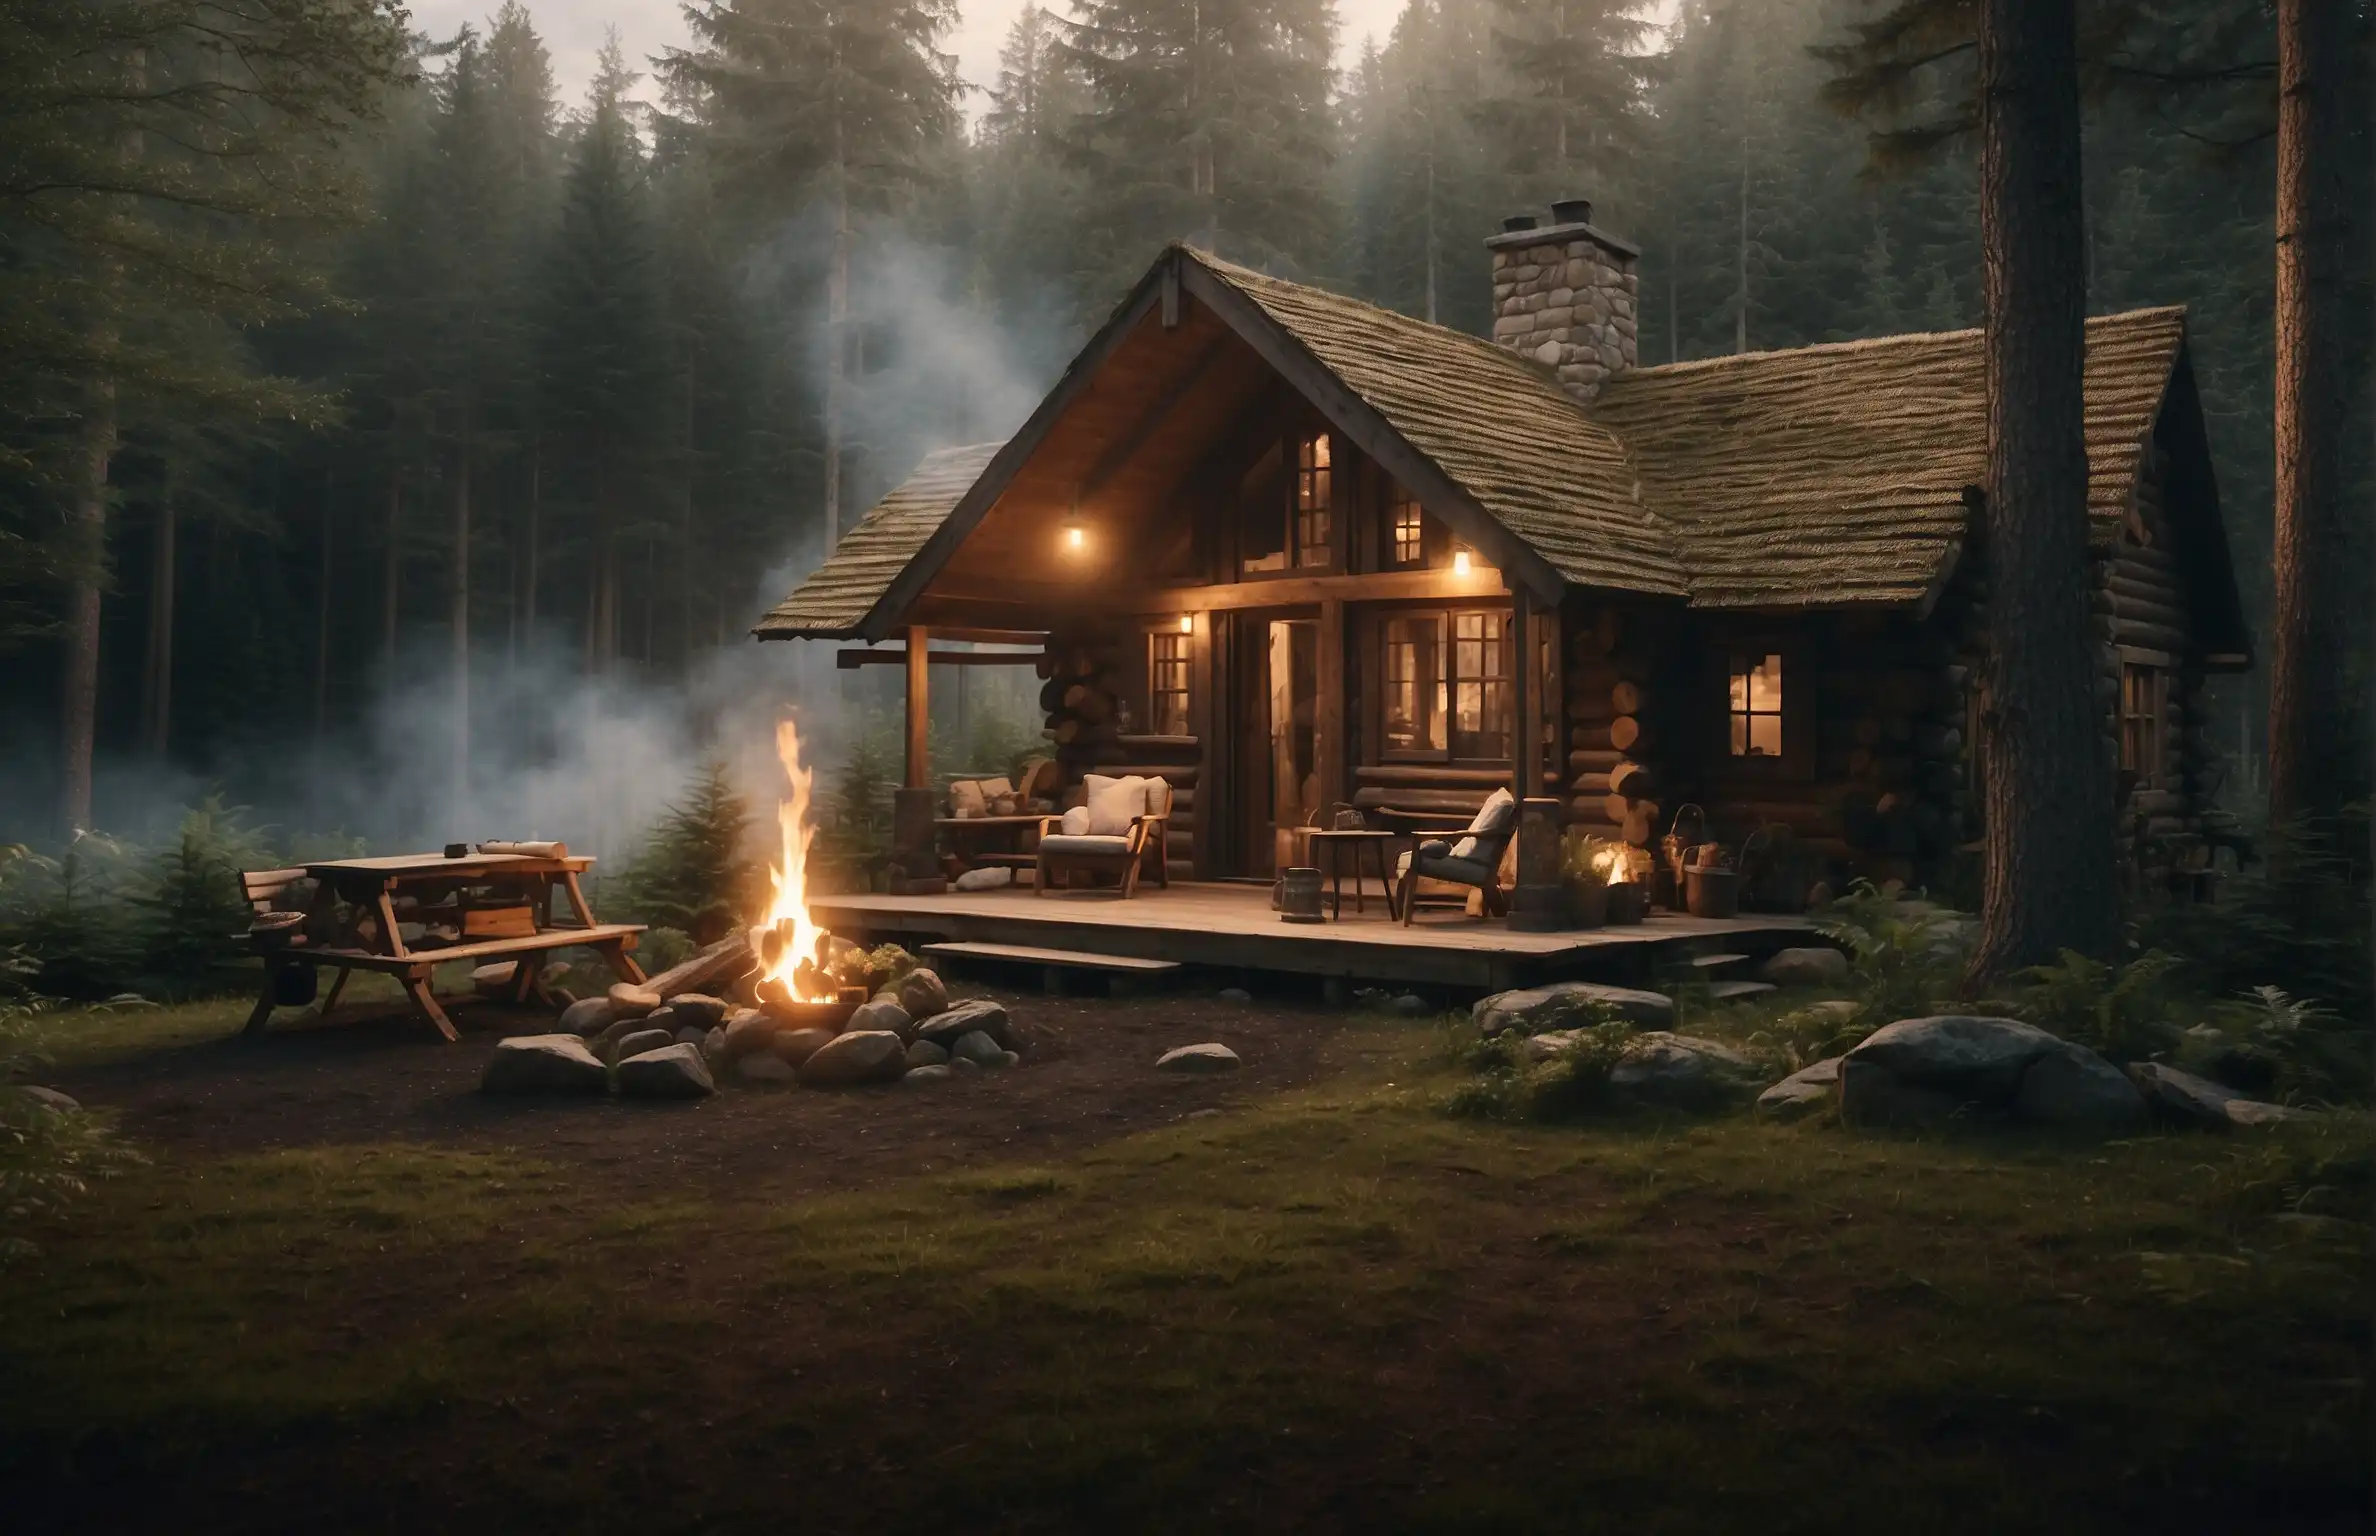 What to Bring Camping in a Cabin